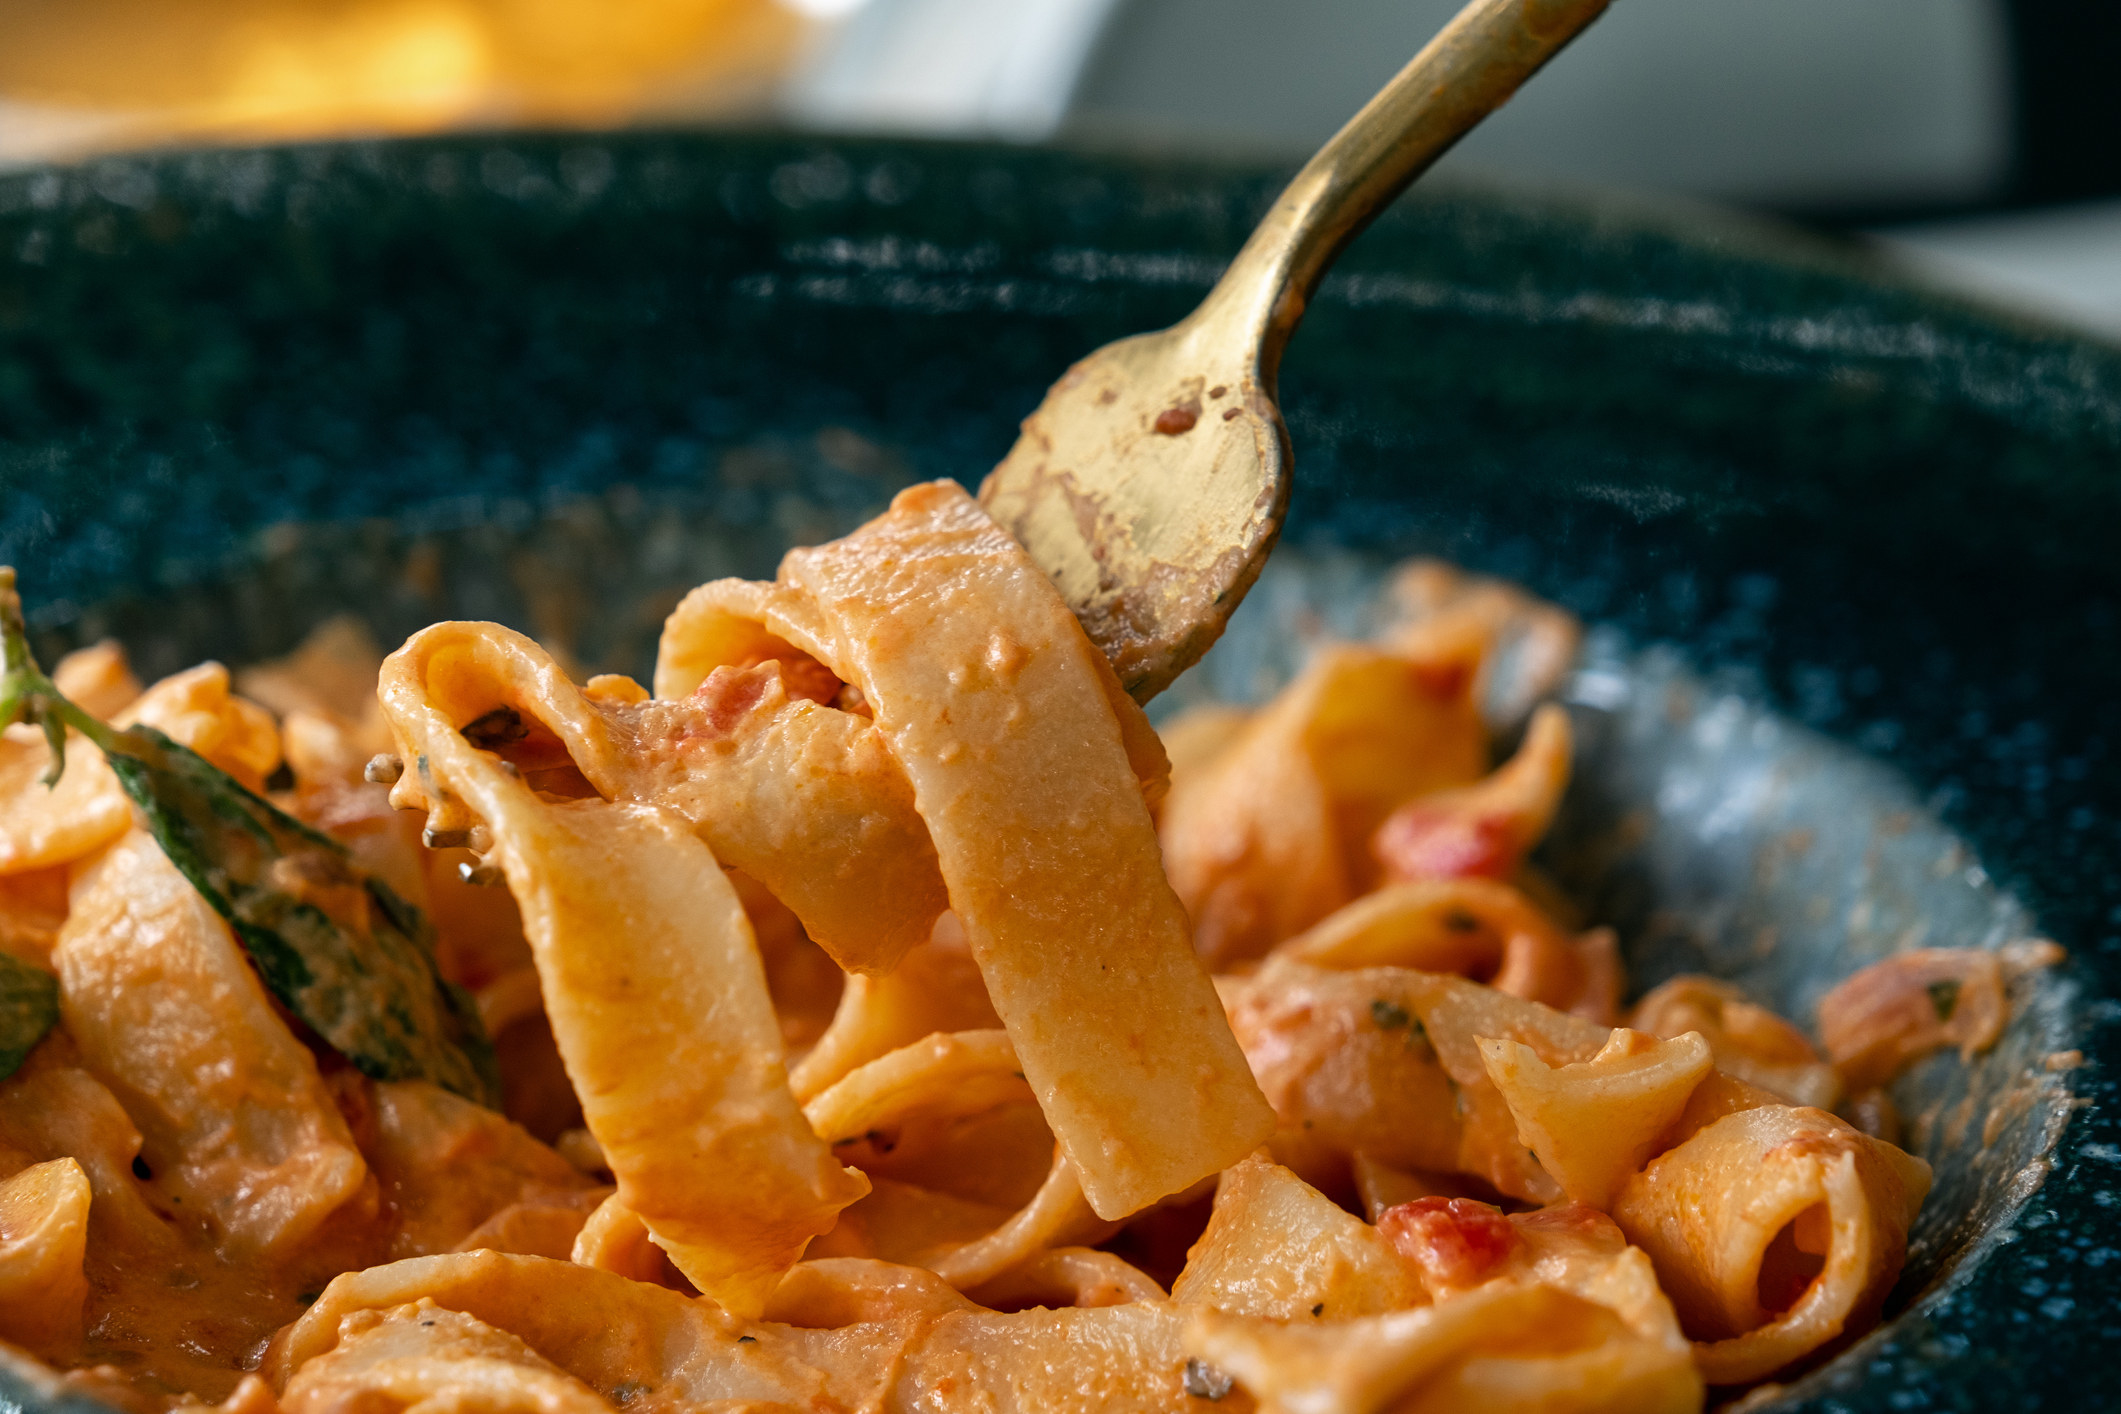 A forkful of pasta in tomato sauce.